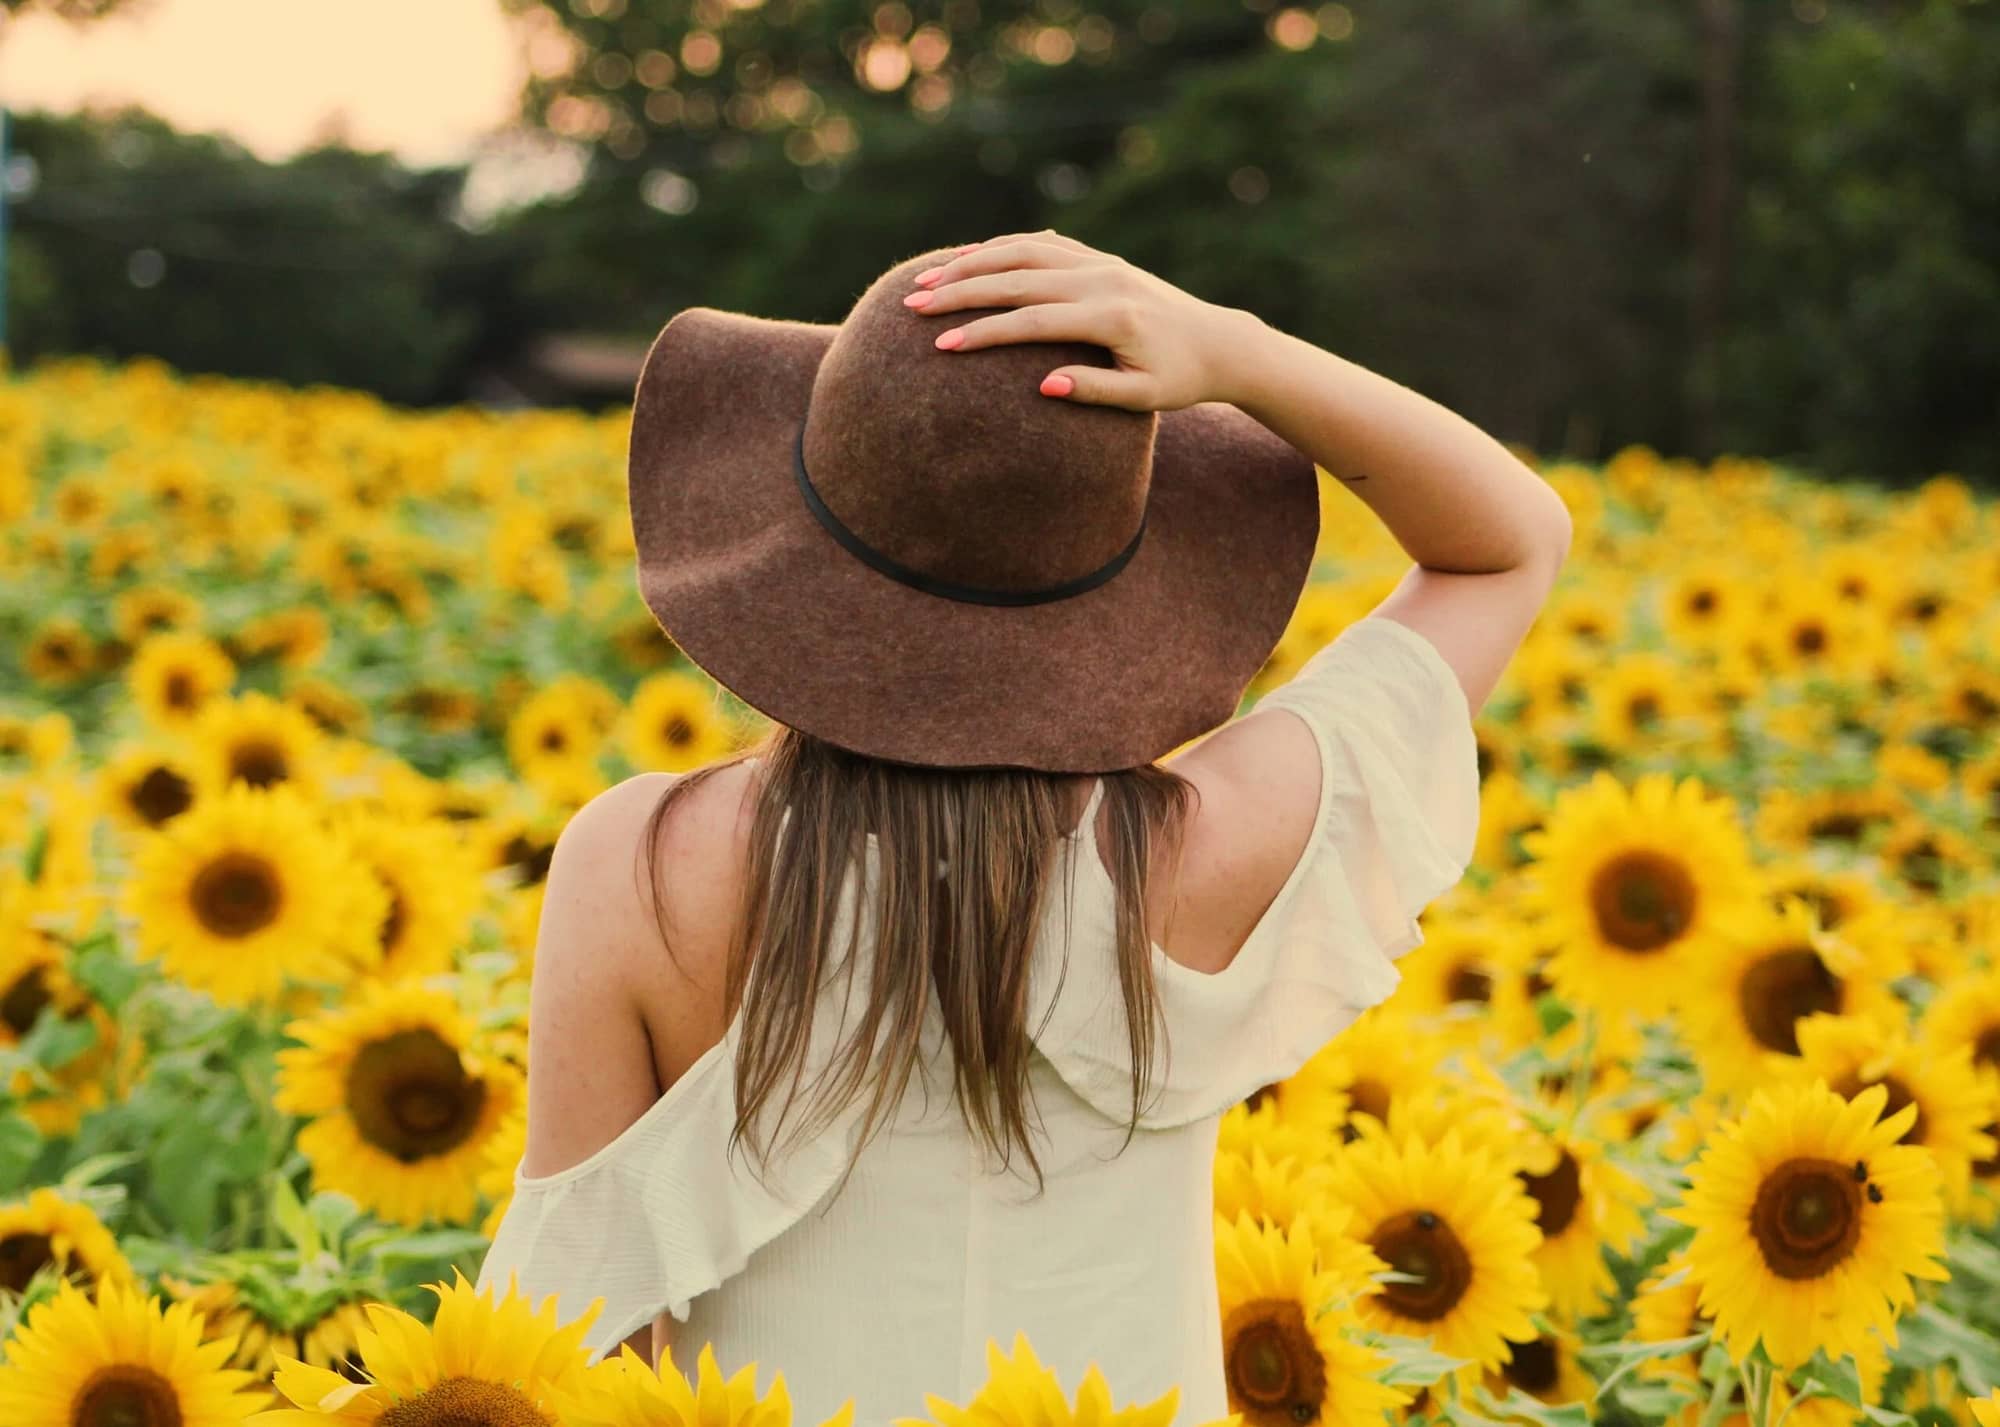 girl with back to us standing in front of sunflowers